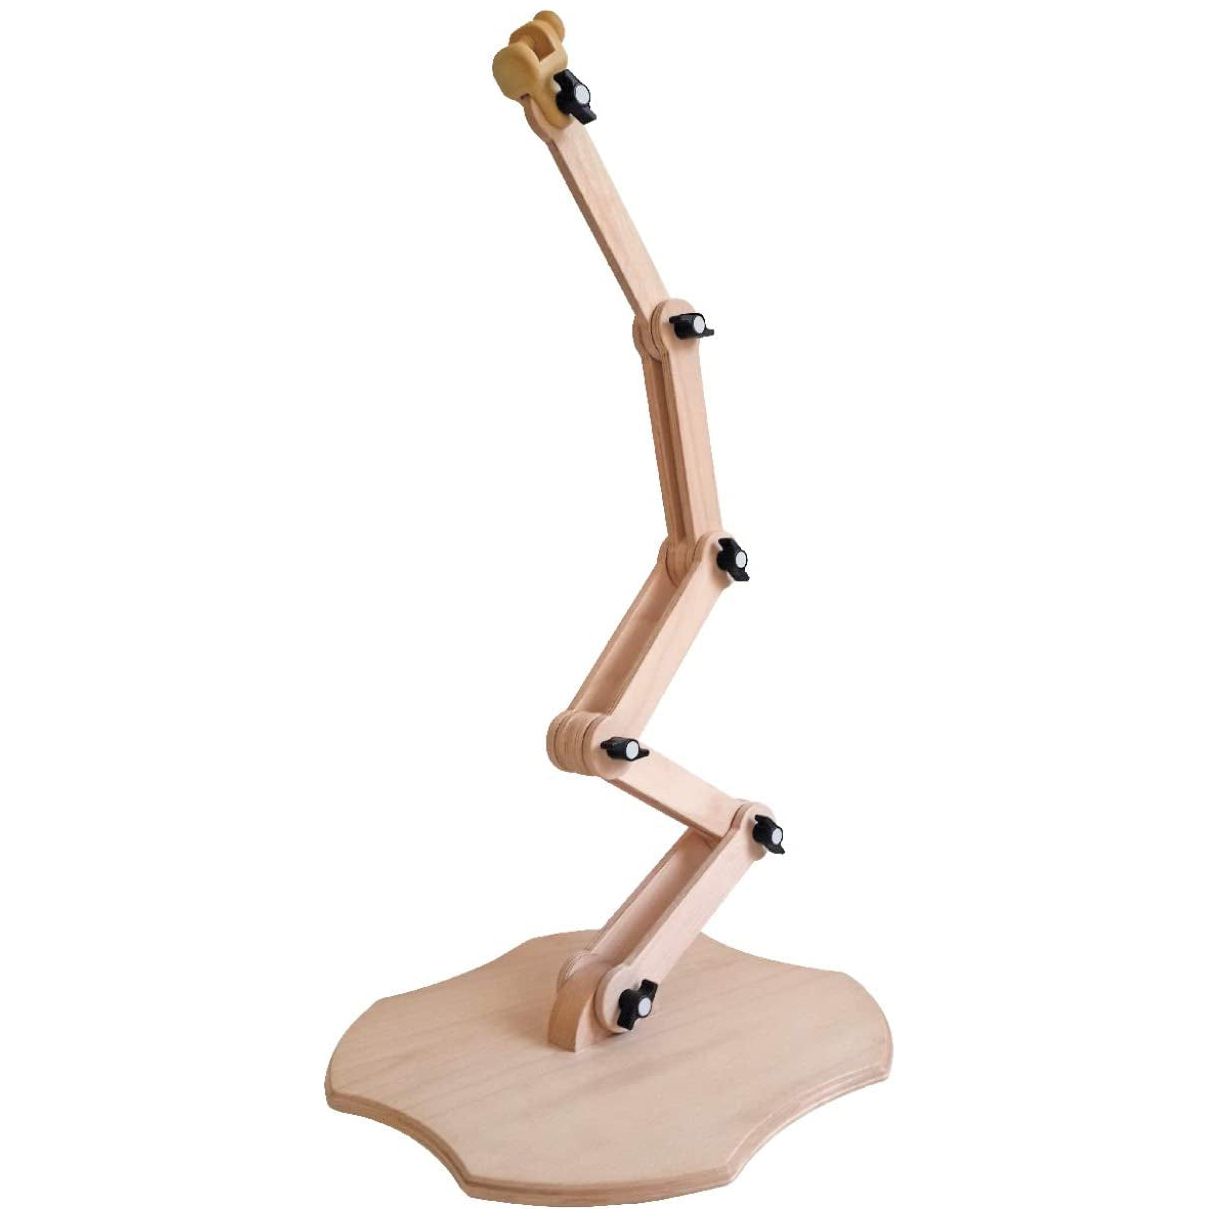 Nurge Premium Quality Adjustable Embroidery Seat Frame Stand, for Embroideries, Cross Stitch